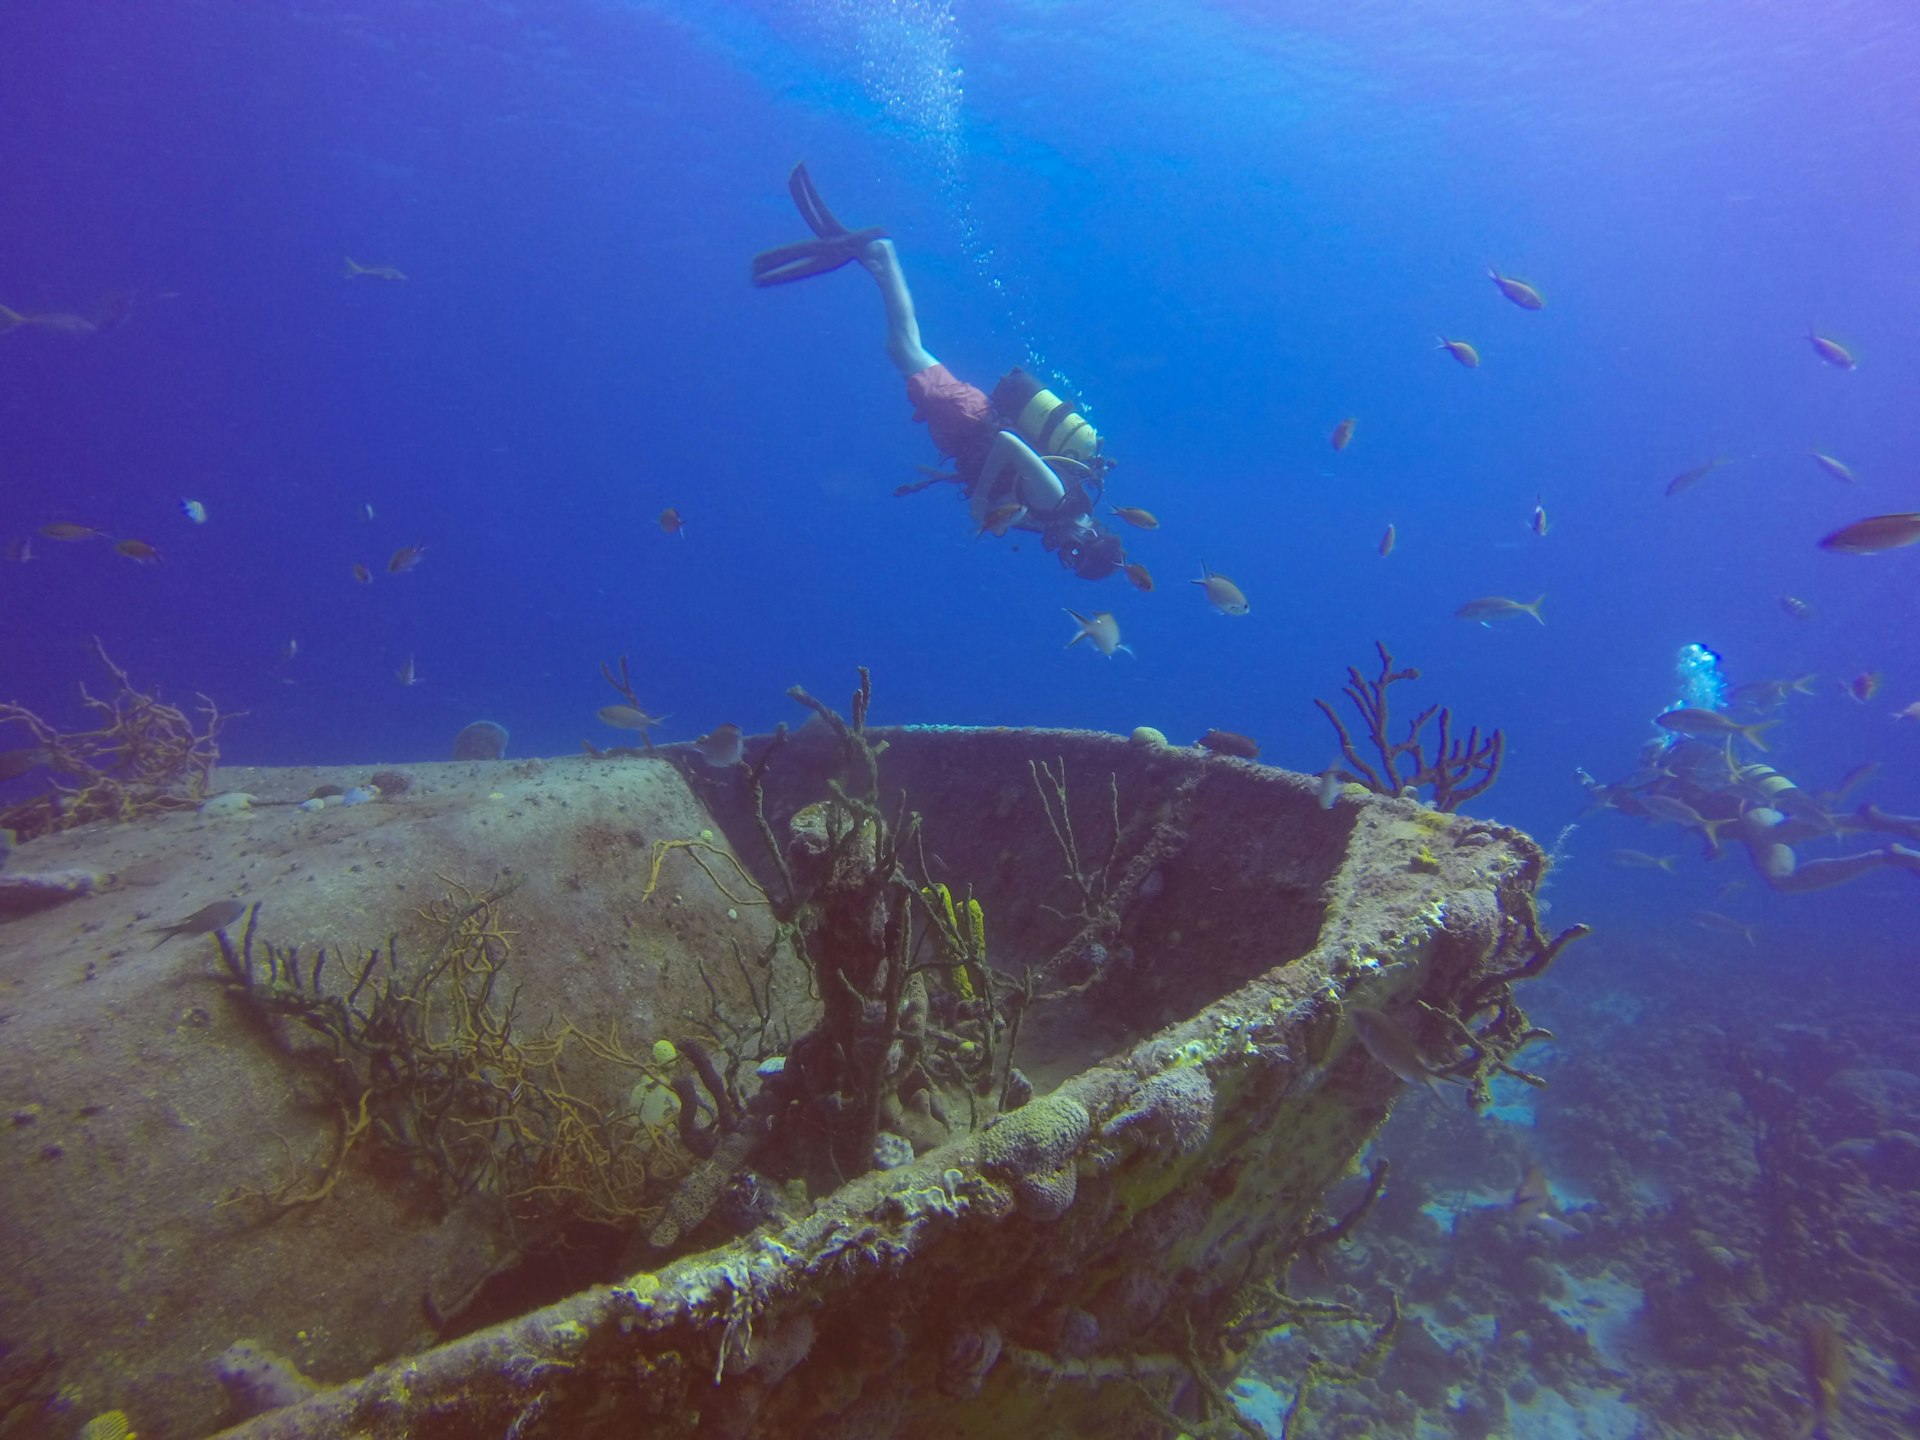 A diver exploring a wreck in the Bay of Pigs